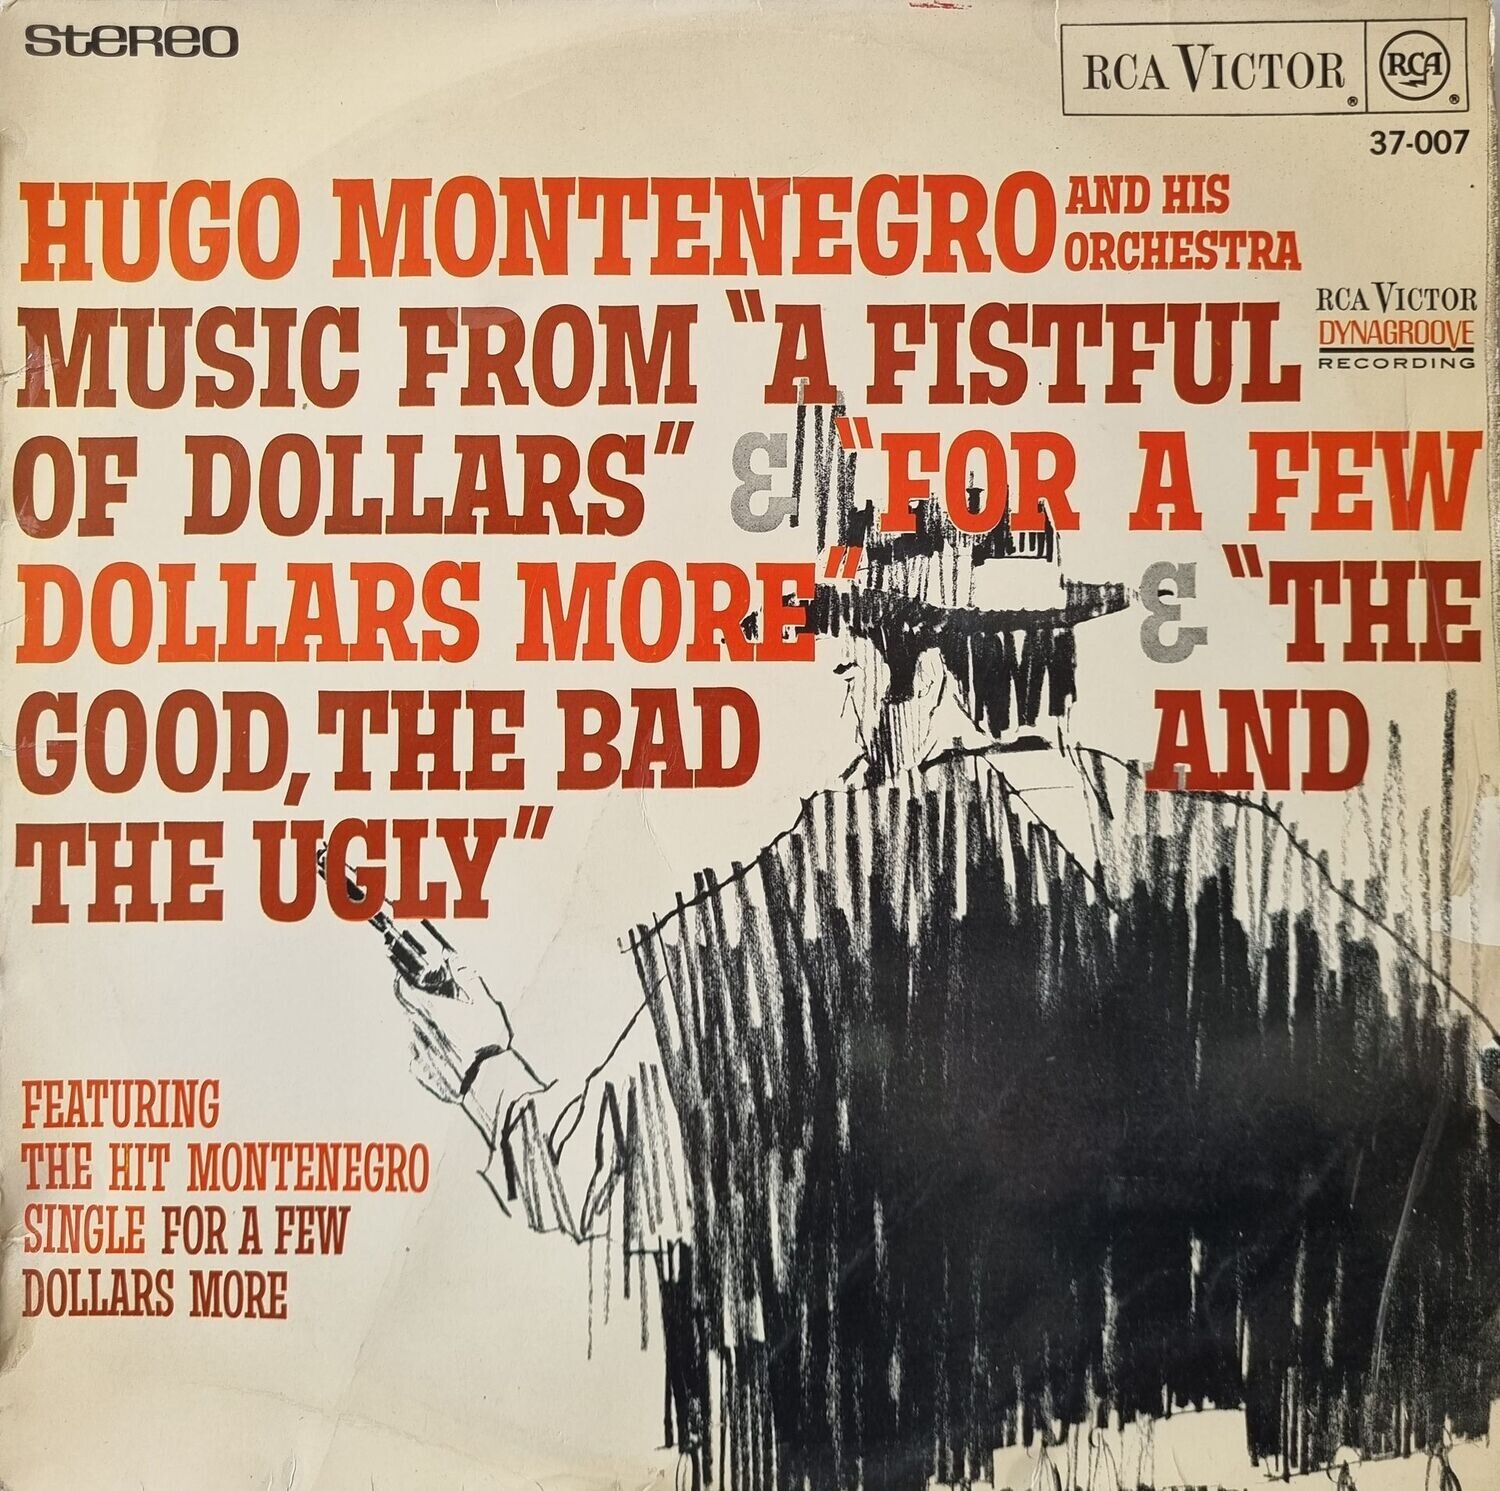 Hugo Montenegro And His Orchestra – Music From "A Fistful Of Dollars", "For A Few Dollars More" & "The Good, The Bad And The Ugly" (1968)